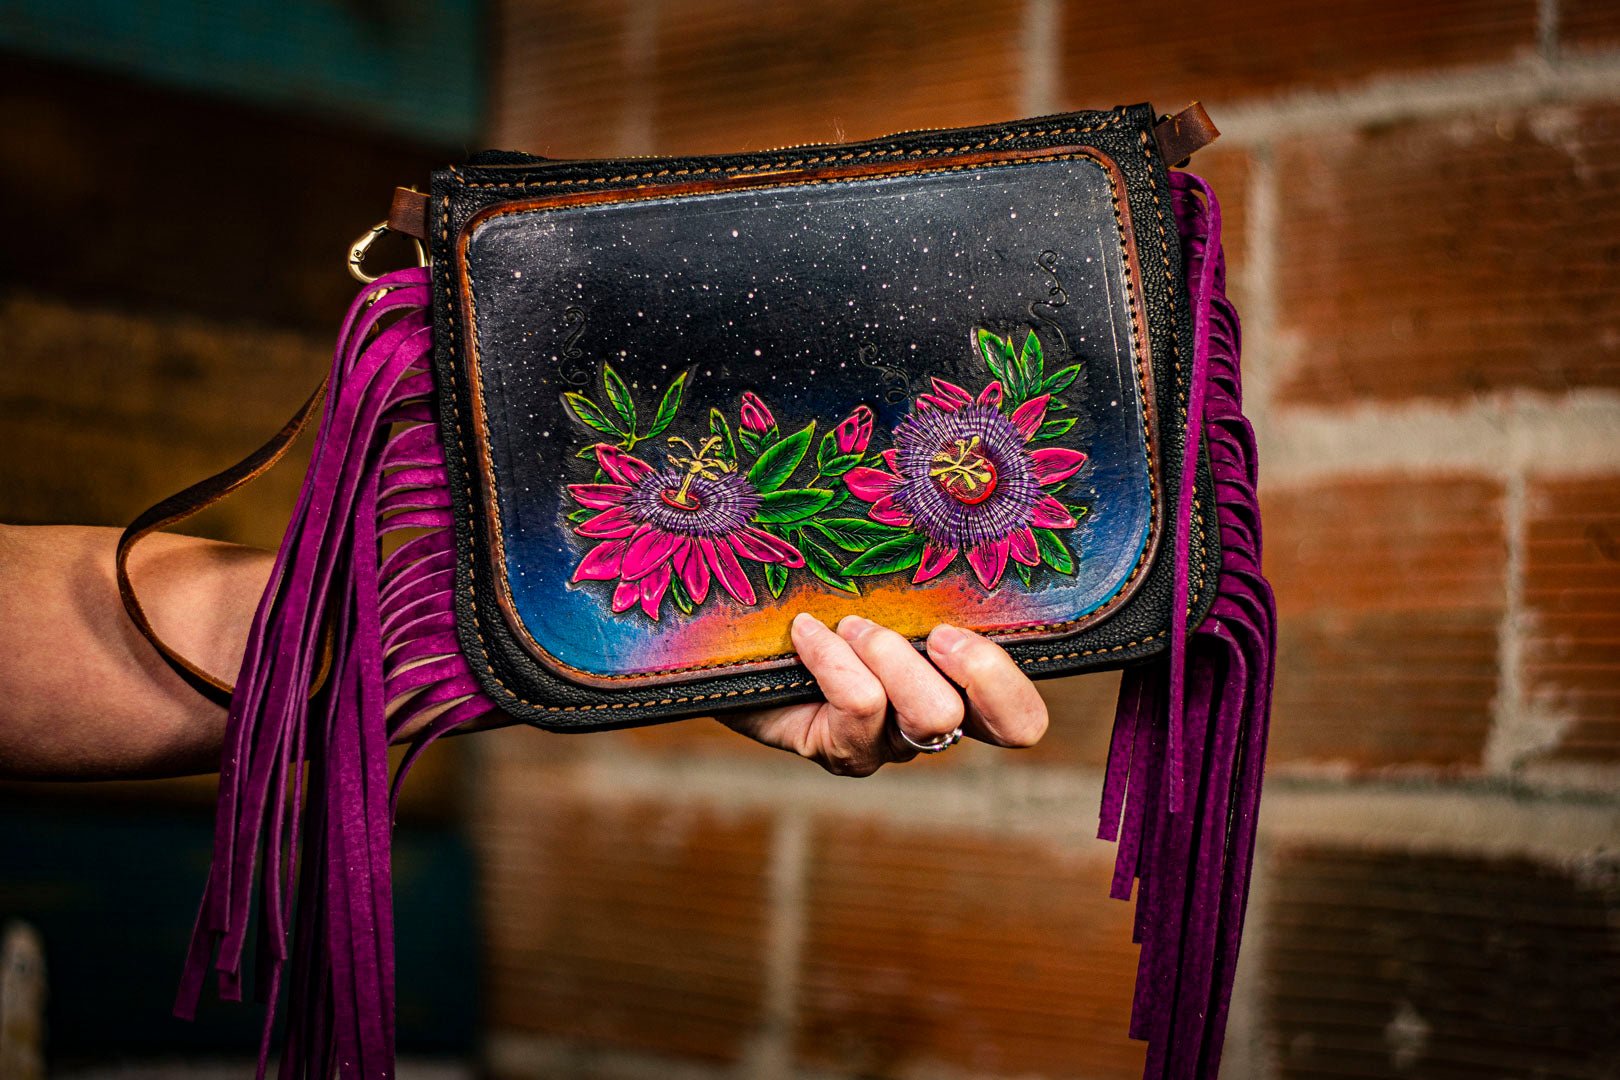 Fringy Dragonfly - Built-in Wallet and Coin Pouch - Leather Clutch Bag - Lotus Leather Paisley Strap